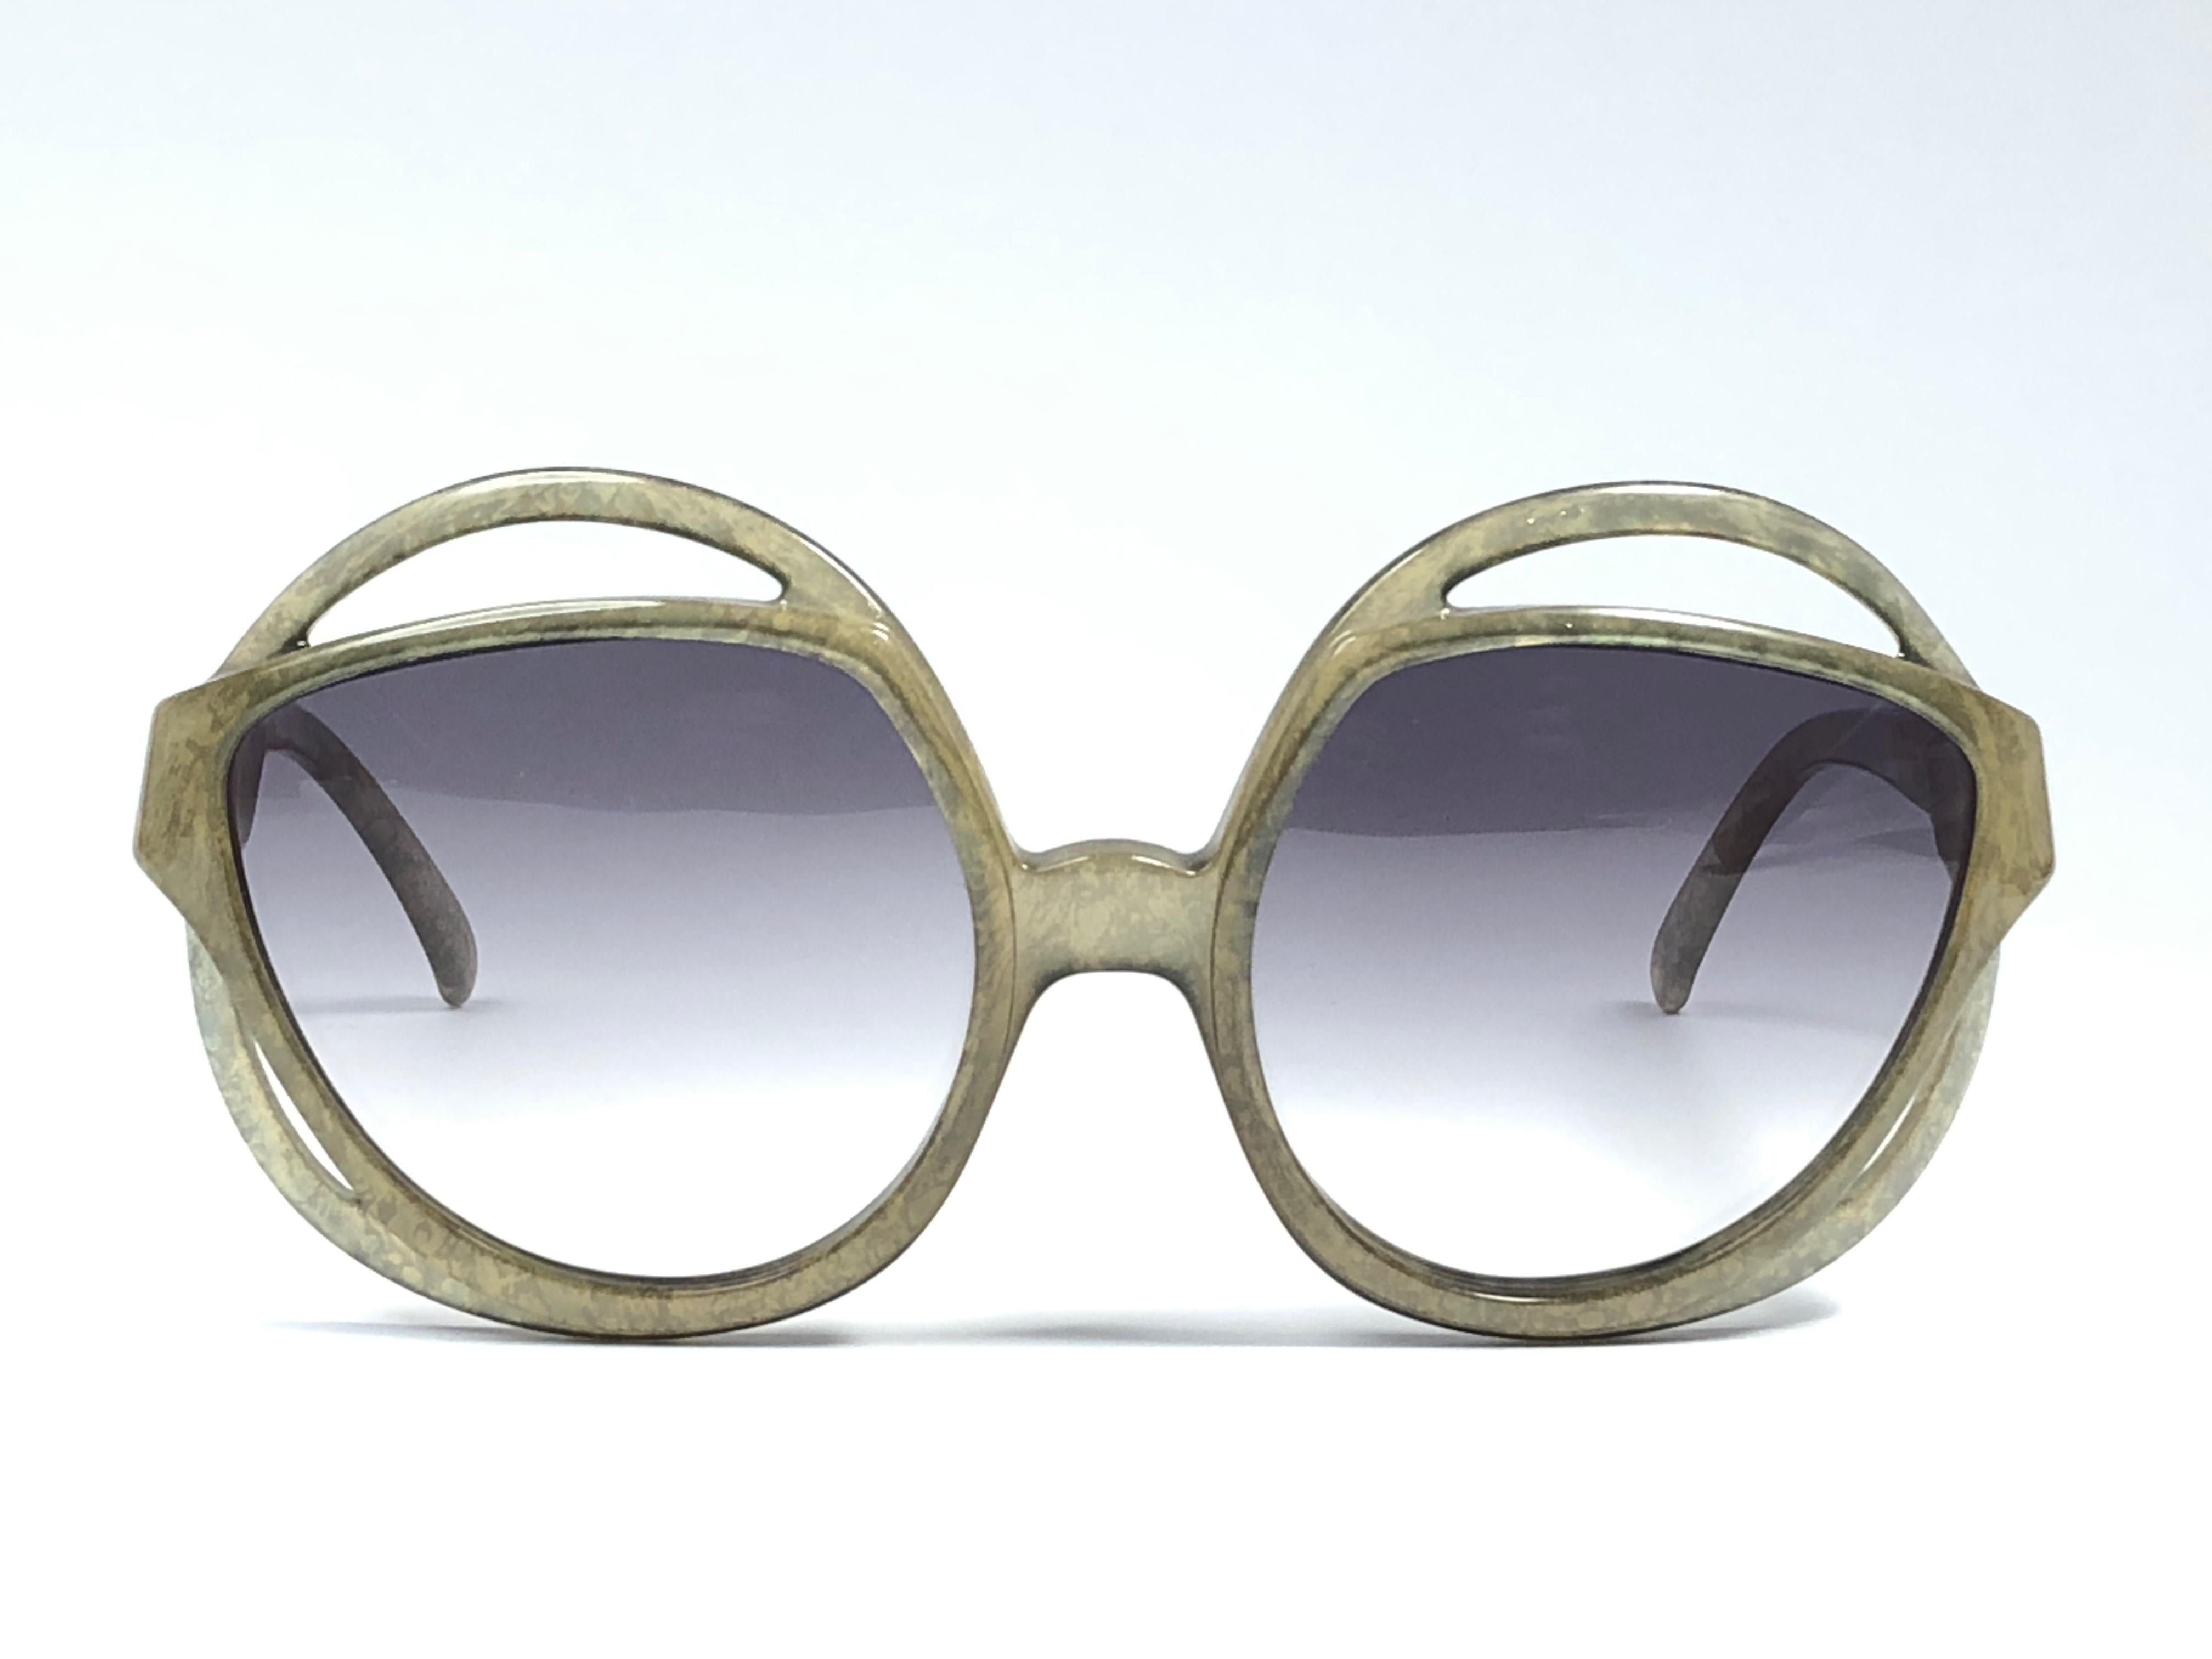 New Vintage Christian Dior 2027 60 Green Jasped frame sporting light gradient lenses. 

Made in Germany.
 
Produced and design in 1970's.

A collector’s piece!

New, never worn or displayed. Comes with its original silver Christian Dior Lunettes